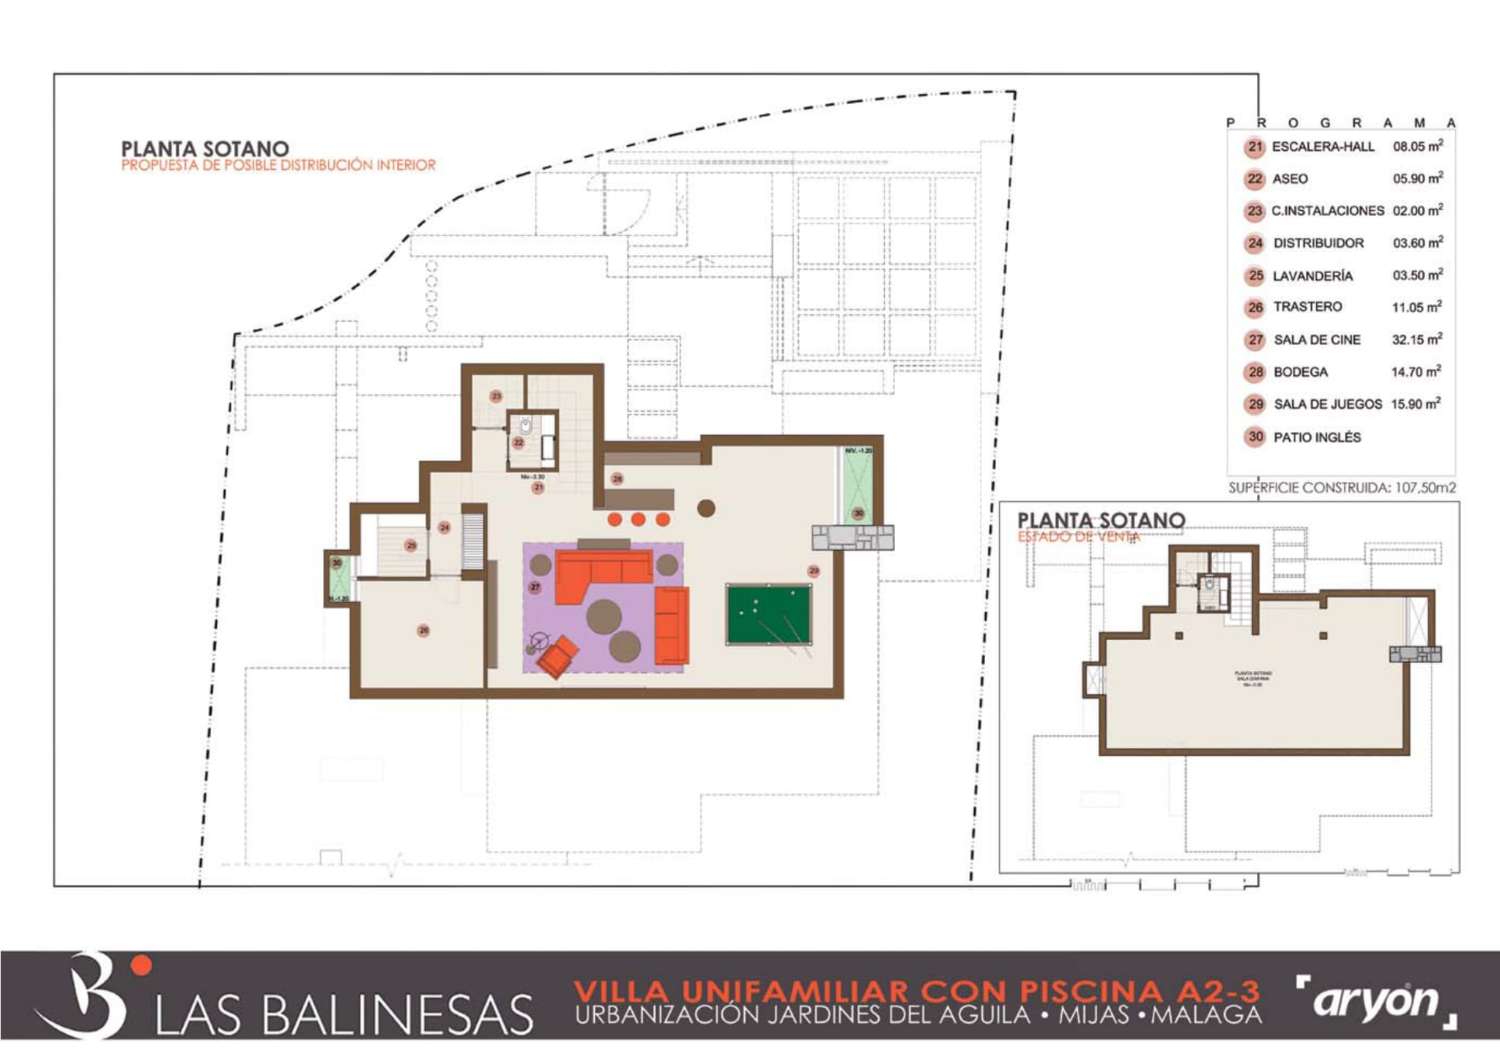 EXECUTION OF A SINGLE-FAMILY HOUSE AND POOL UNDER THE PASSIVHAUS STANDARD, in its PREMIUM CATEGORY, LOCATED IN URB. GARDENS OF THE EAGLE, MIJAS COSTA.